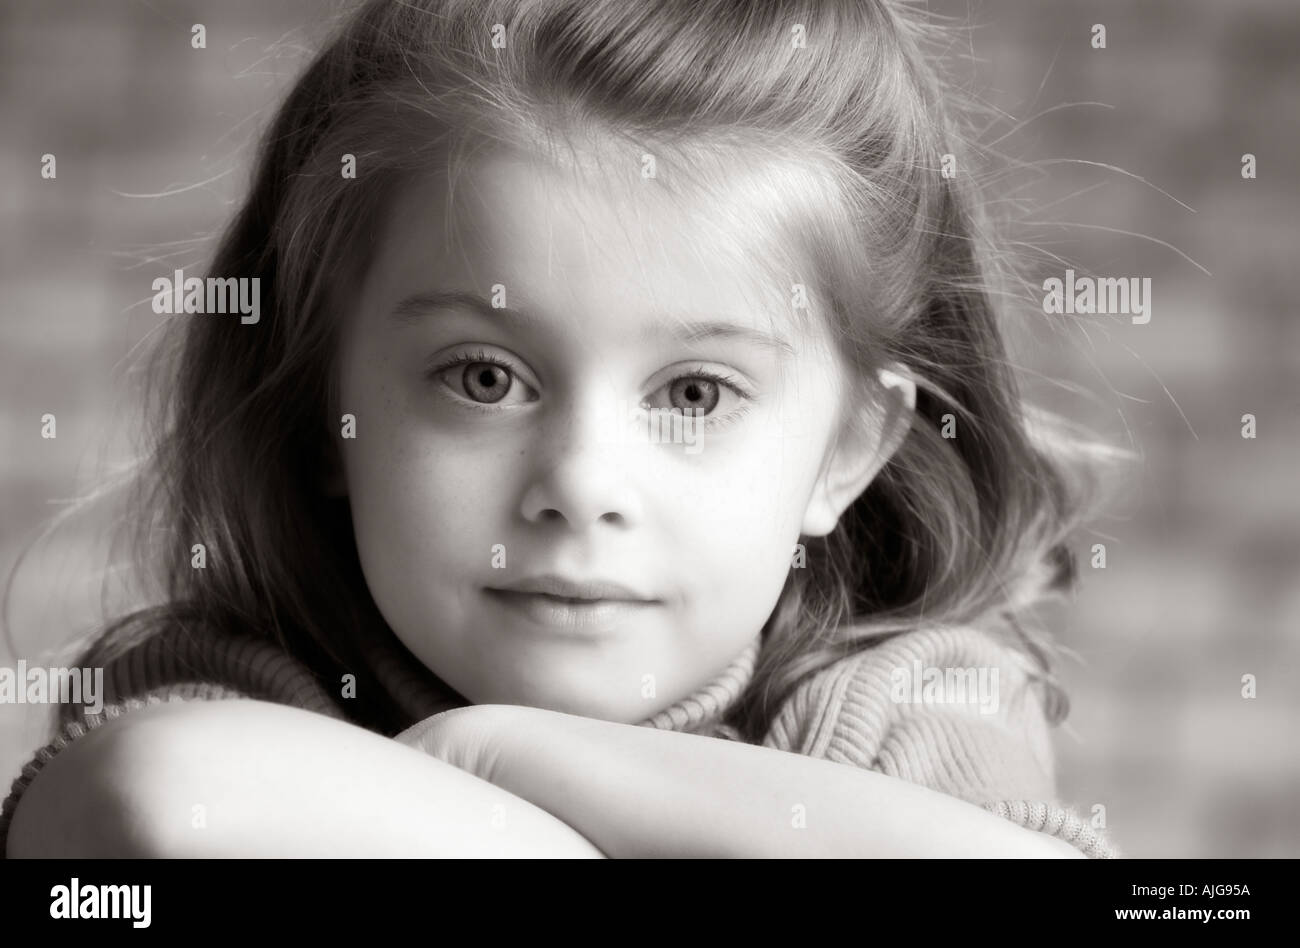 Black-and-white portrait of an Aaluring Caucasian little girl Stock Photo